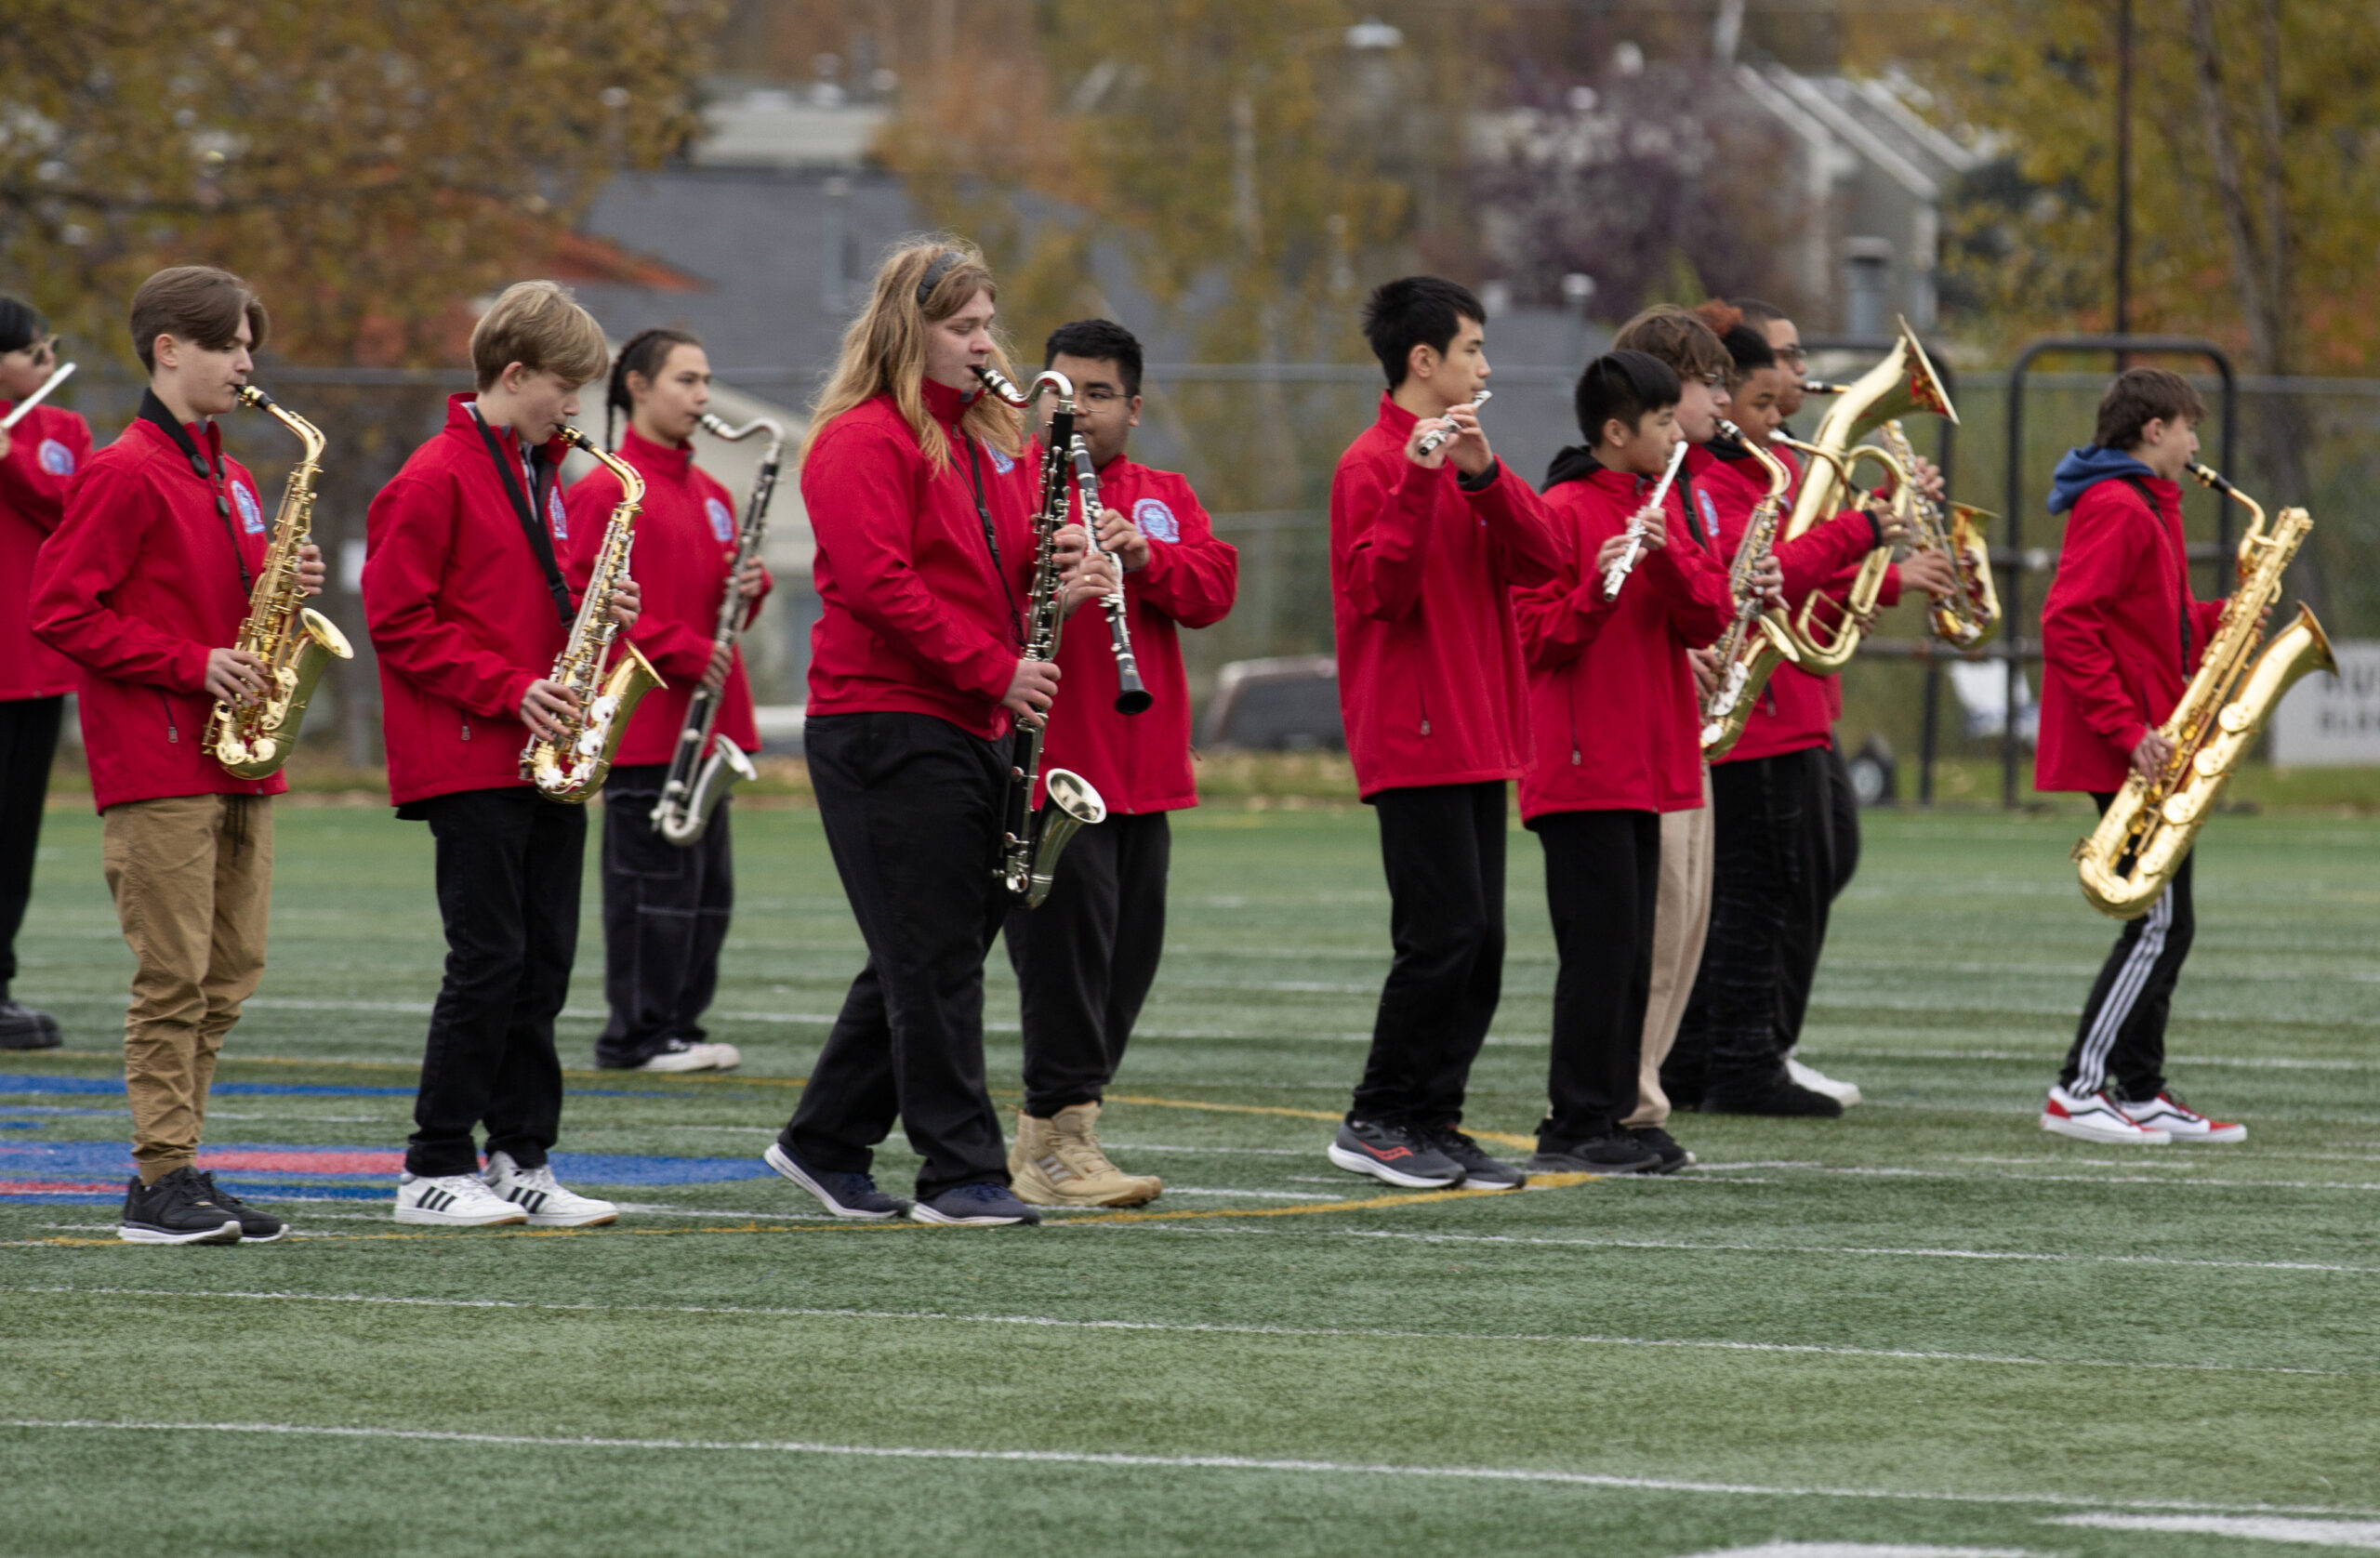 Students in red jackets march and play instruments at Bettye Davis East High School on Sept. 30, 2023 (Shiri Segal/Alaska Public Media)